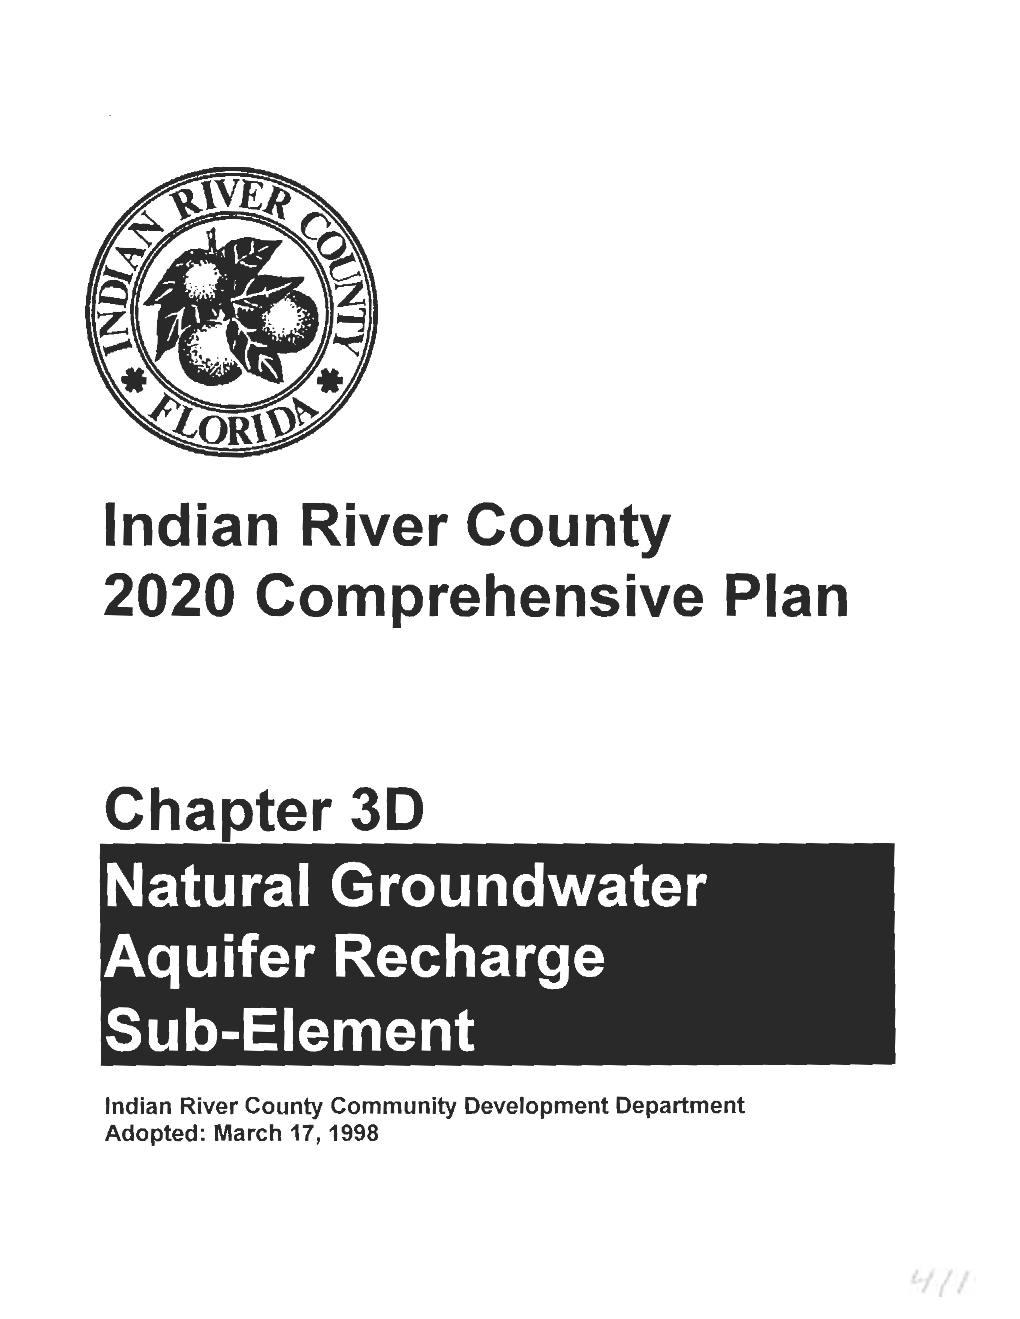 Indian River County 2020 Comprehensive Plan Chapter 3 Infrastructure Element